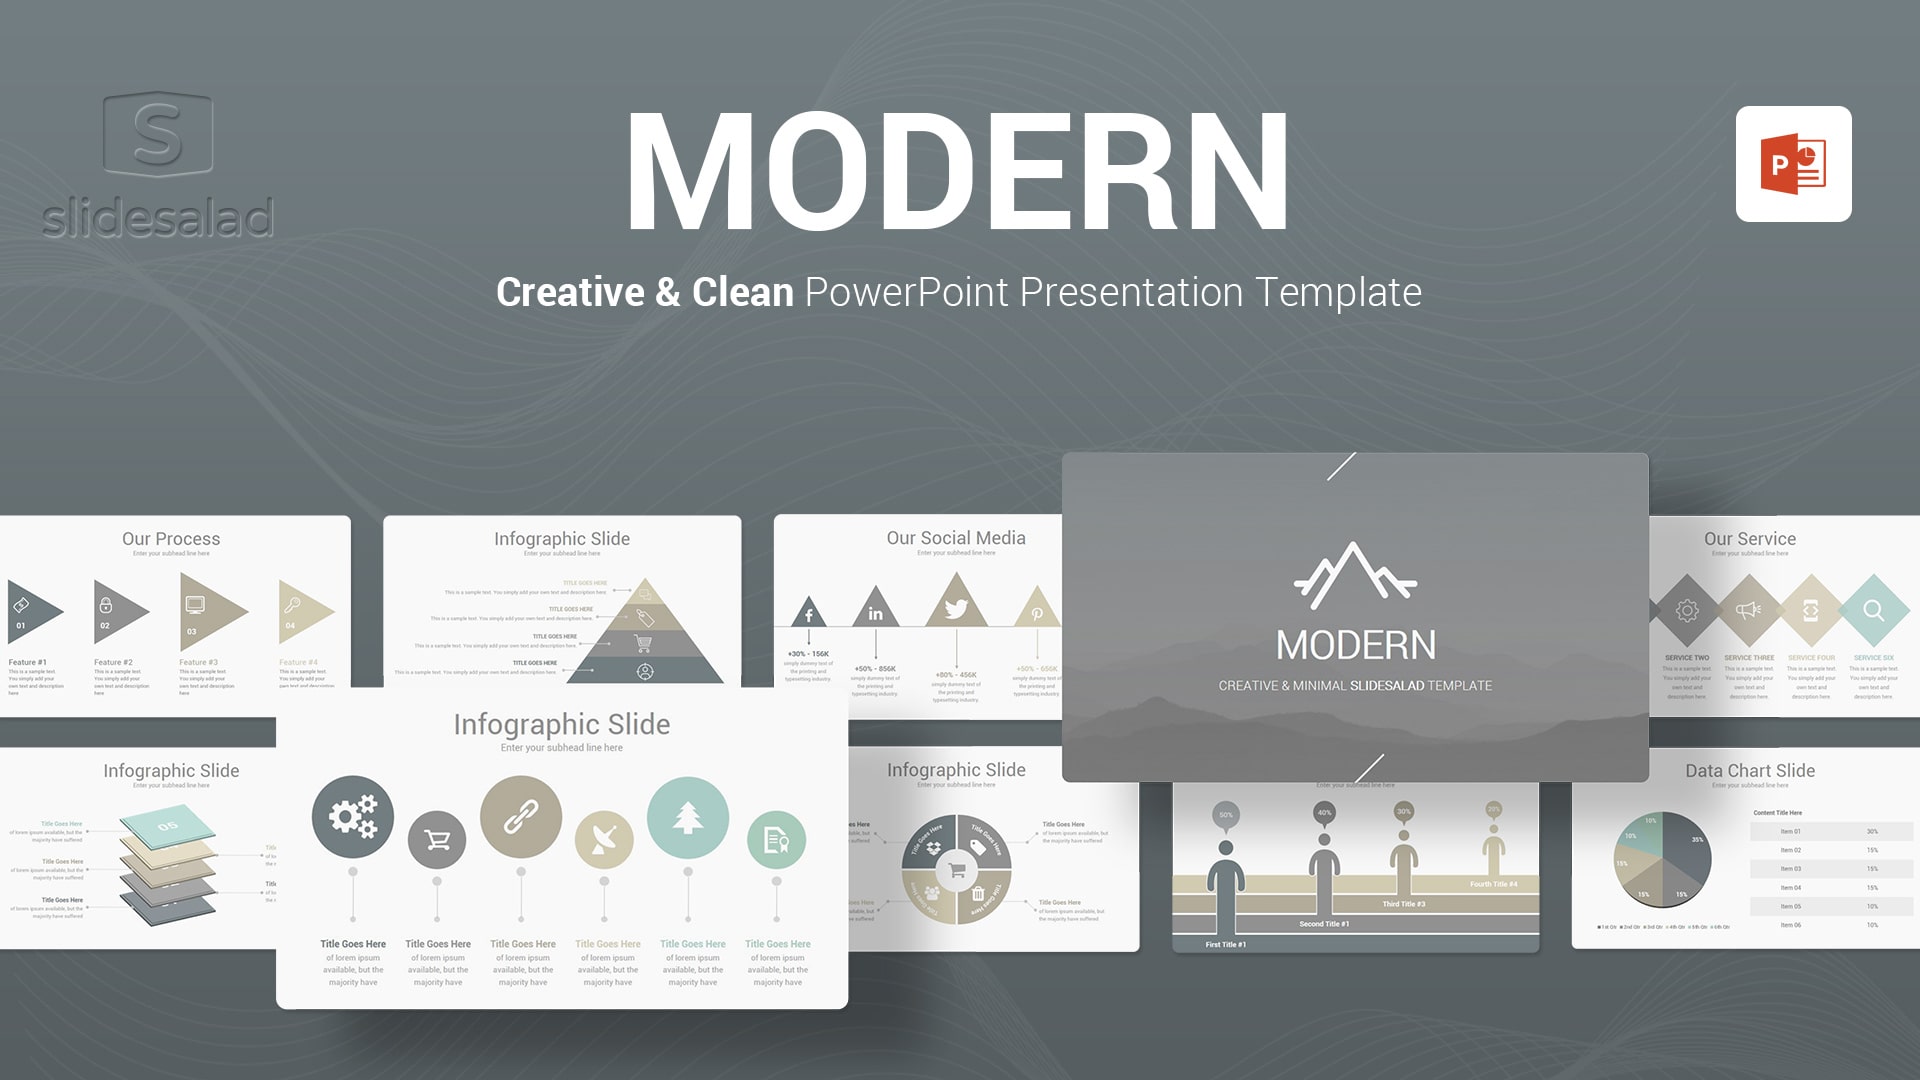 Modern PowerPoint Template for Presentation